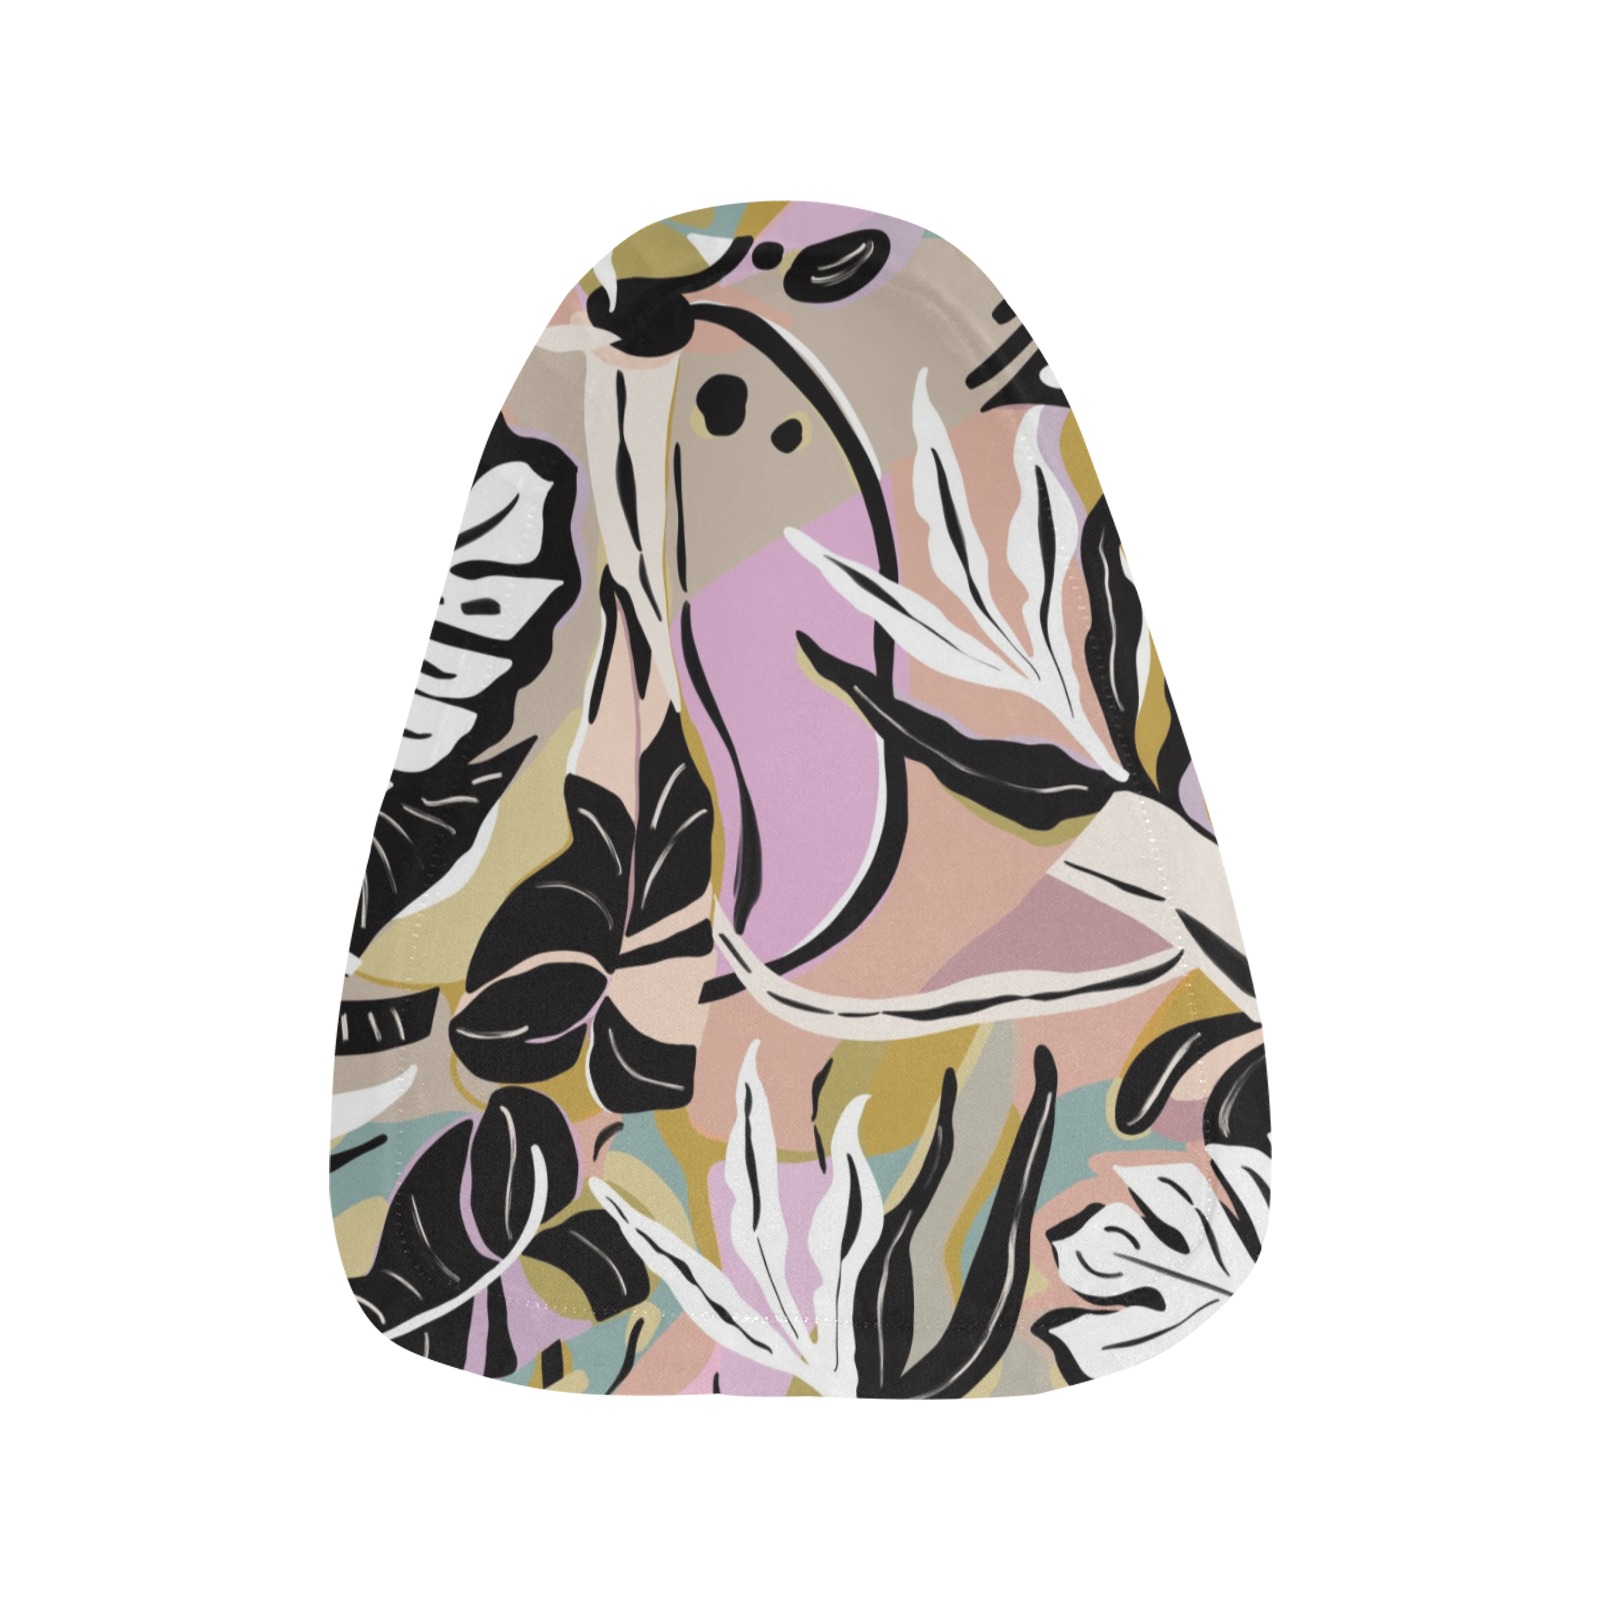 Tropical modern simple graphic Waterproof Bicycle Seat Cover